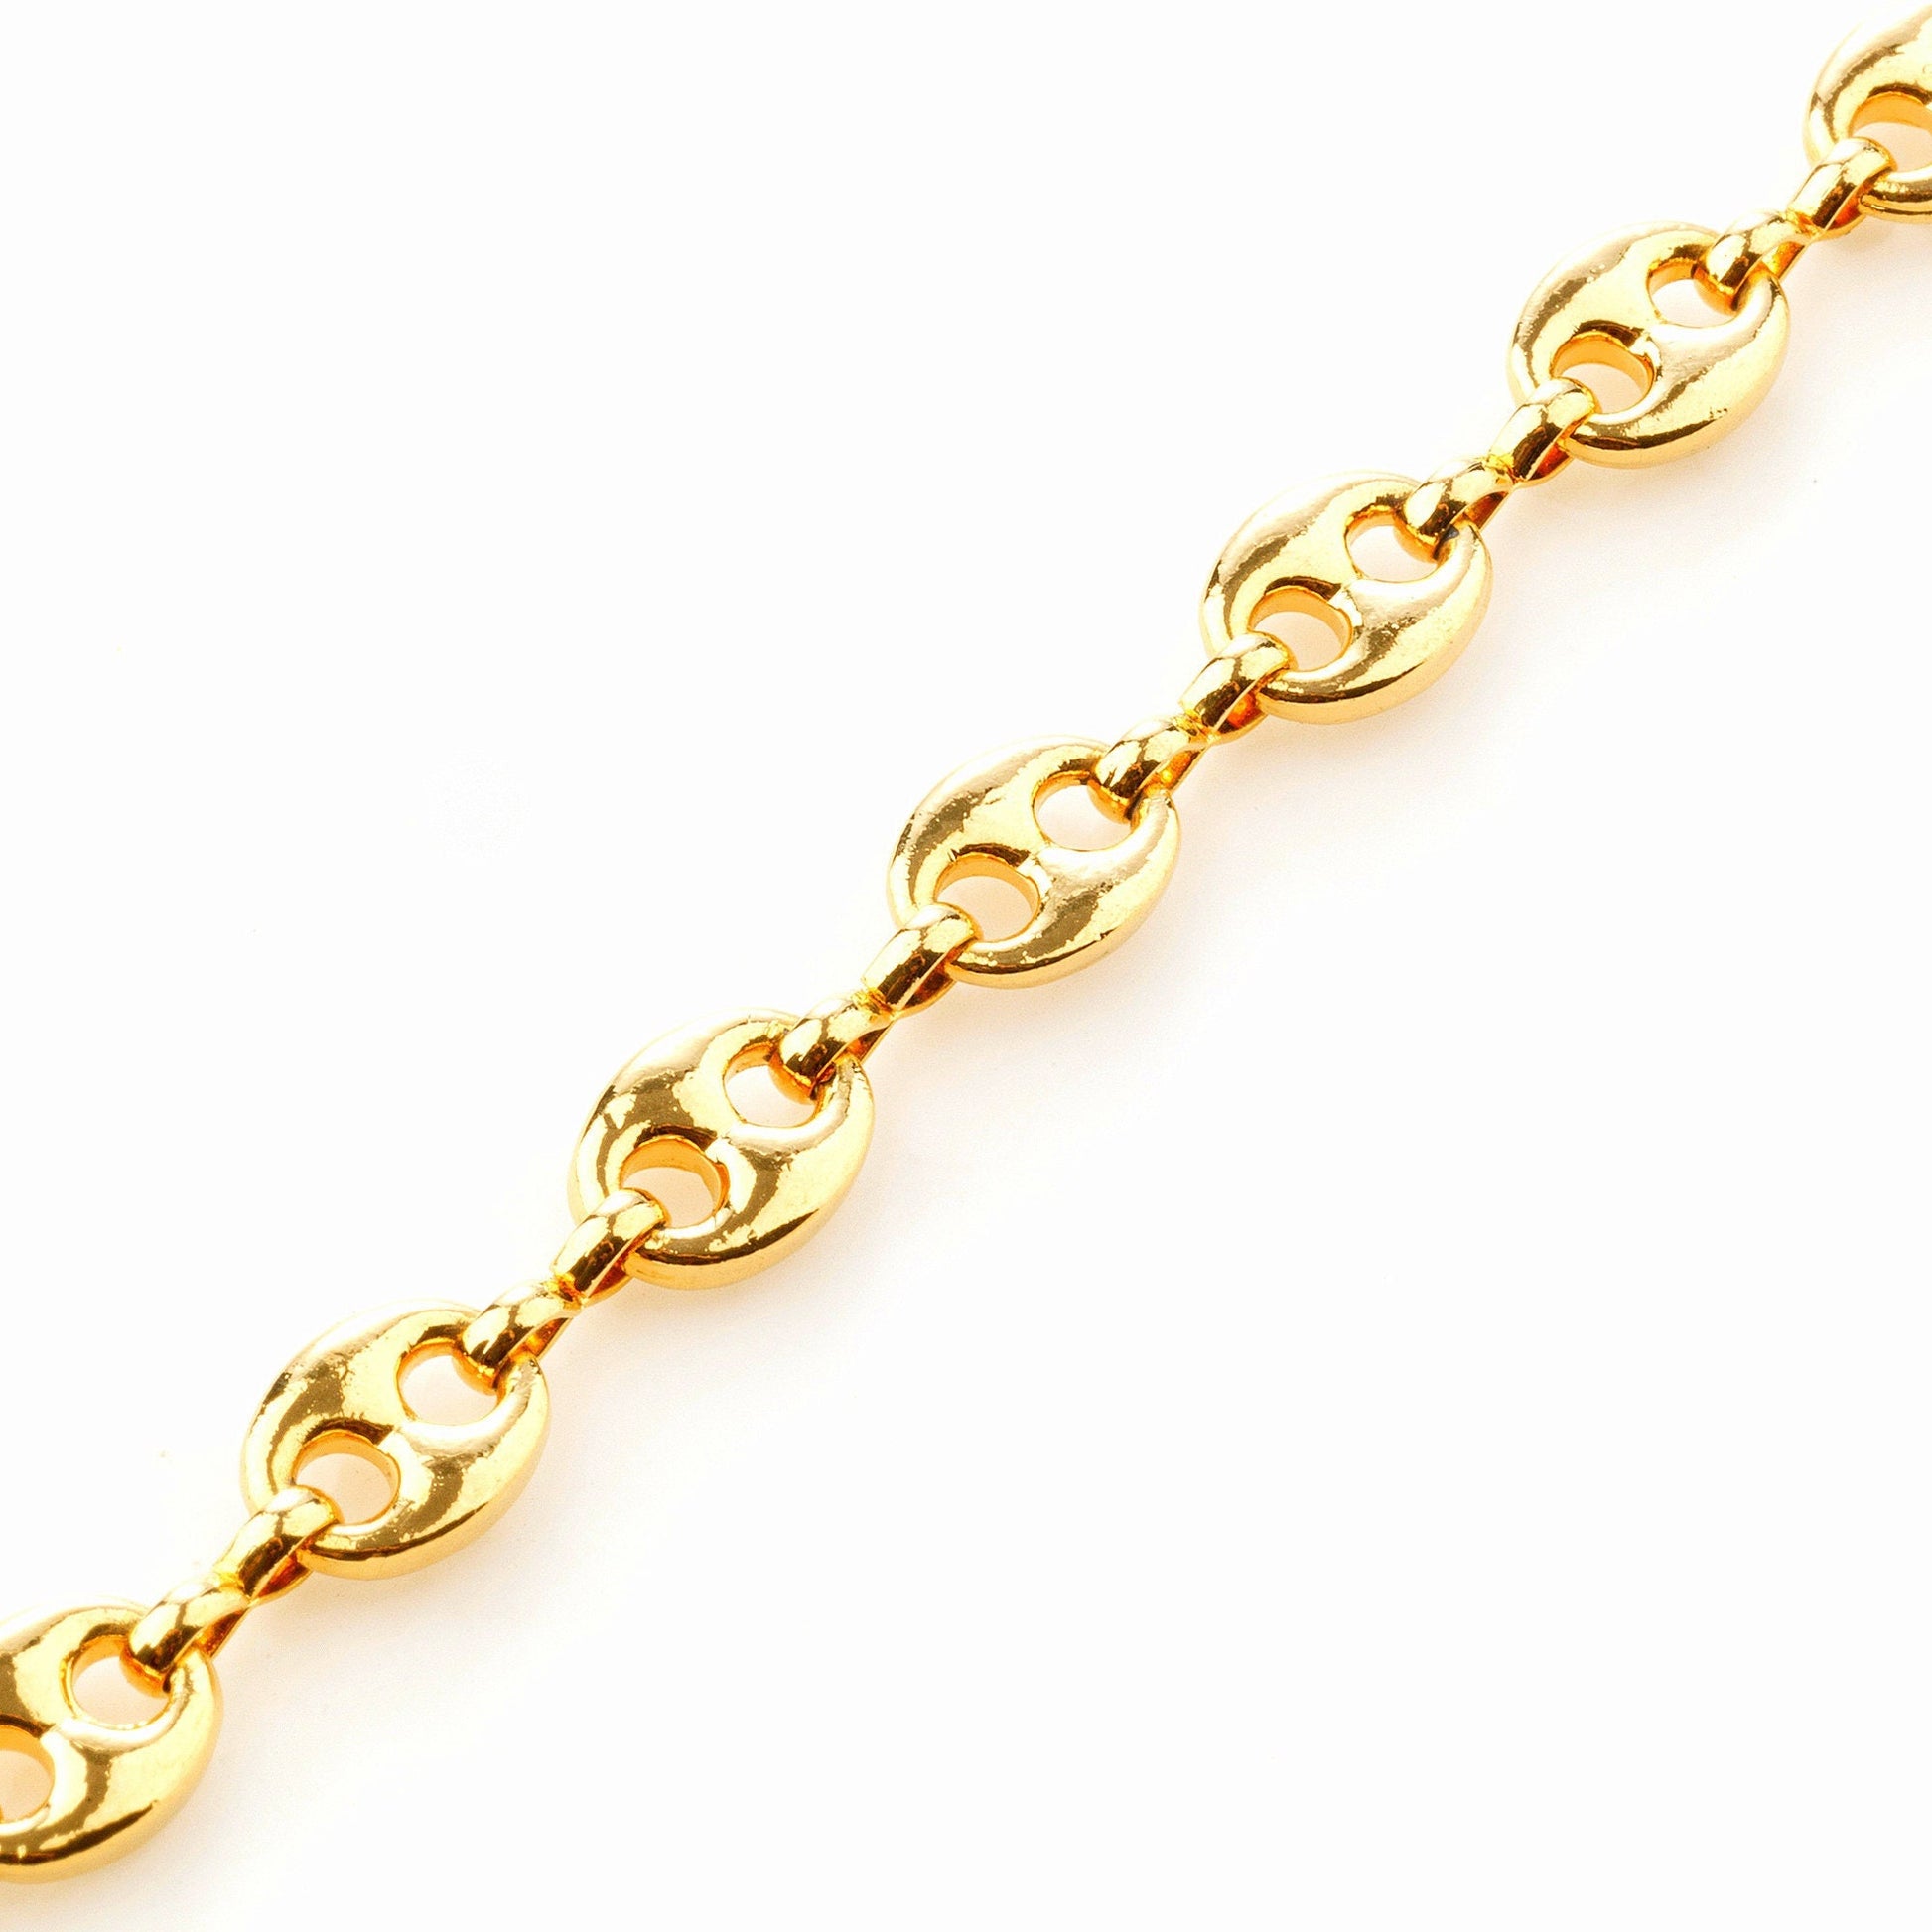 Channel cable looking link chain 18k Gold Plated 6mm chain sold by foot for jewelry making gfc108